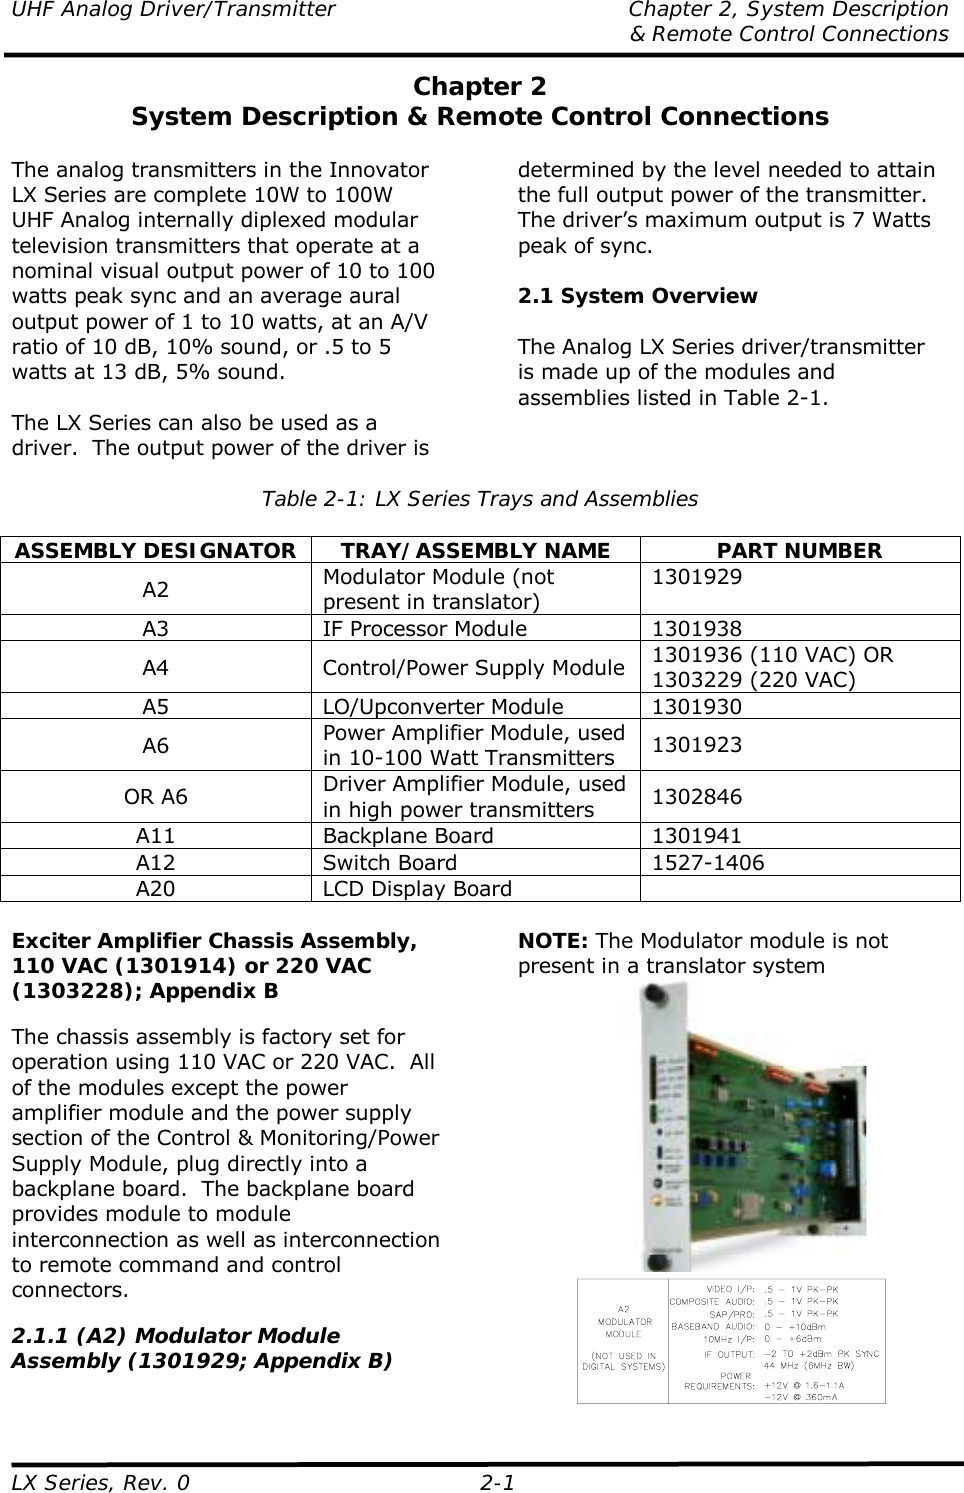 UHF Analog Driver/Transmitter  Chapter 2, System Description   &amp; Remote Control Connections LX Series, Rev. 0  2-1 Chapter 2 System Description &amp; Remote Control Connections  The analog transmitters in the Innovator LX Series are complete 10W to 100W UHF Analog internally diplexed modular television transmitters that operate at a nominal visual output power of 10 to 100 watts peak sync and an average aural output power of 1 to 10 watts, at an A/V ratio of 10 dB, 10% sound, or .5 to 5 watts at 13 dB, 5% sound.  The LX Series can also be used as a driver.  The output power of the driver is determined by the level needed to attain the full output power of the transmitter. The driver’s maximum output is 7 Watts peak of sync.  2.1 System Overview  The Analog LX Series driver/transmitter is made up of the modules and assemblies listed in Table 2-1.  Table 2-1: LX Series Trays and Assemblies  ASSEMBLY DESIGNATOR  TRAY/ASSEMBLY NAME  PART NUMBER A2  Modulator Module (not present in translator) 1301929 A3  IF Processor Module  1301938 A4  Control/Power Supply Module  1301936 (110 VAC) OR 1303229 (220 VAC) A5 LO/Upconverter Module 1301930 A6  Power Amplifier Module, used in 10-100 Watt Transmitters  1301923 OR A6  Driver Amplifier Module, used in high power transmitters  1302846 A11 Backplane Board  1301941 A12 Switch Board  1527-1406 A20  LCD Display Board    Exciter Amplifier Chassis Assembly, 110 VAC (1301914) or 220 VAC (1303228); Appendix B  The chassis assembly is factory set for operation using 110 VAC or 220 VAC.  All of the modules except the power amplifier module and the power supply section of the Control &amp; Monitoring/Power Supply Module, plug directly into a backplane board.  The backplane board provides module to module interconnection as well as interconnection to remote command and control connectors.  2.1.1 (A2) Modulator Module Assembly (1301929; Appendix B)  NOTE: The Modulator module is not present in a translator system   